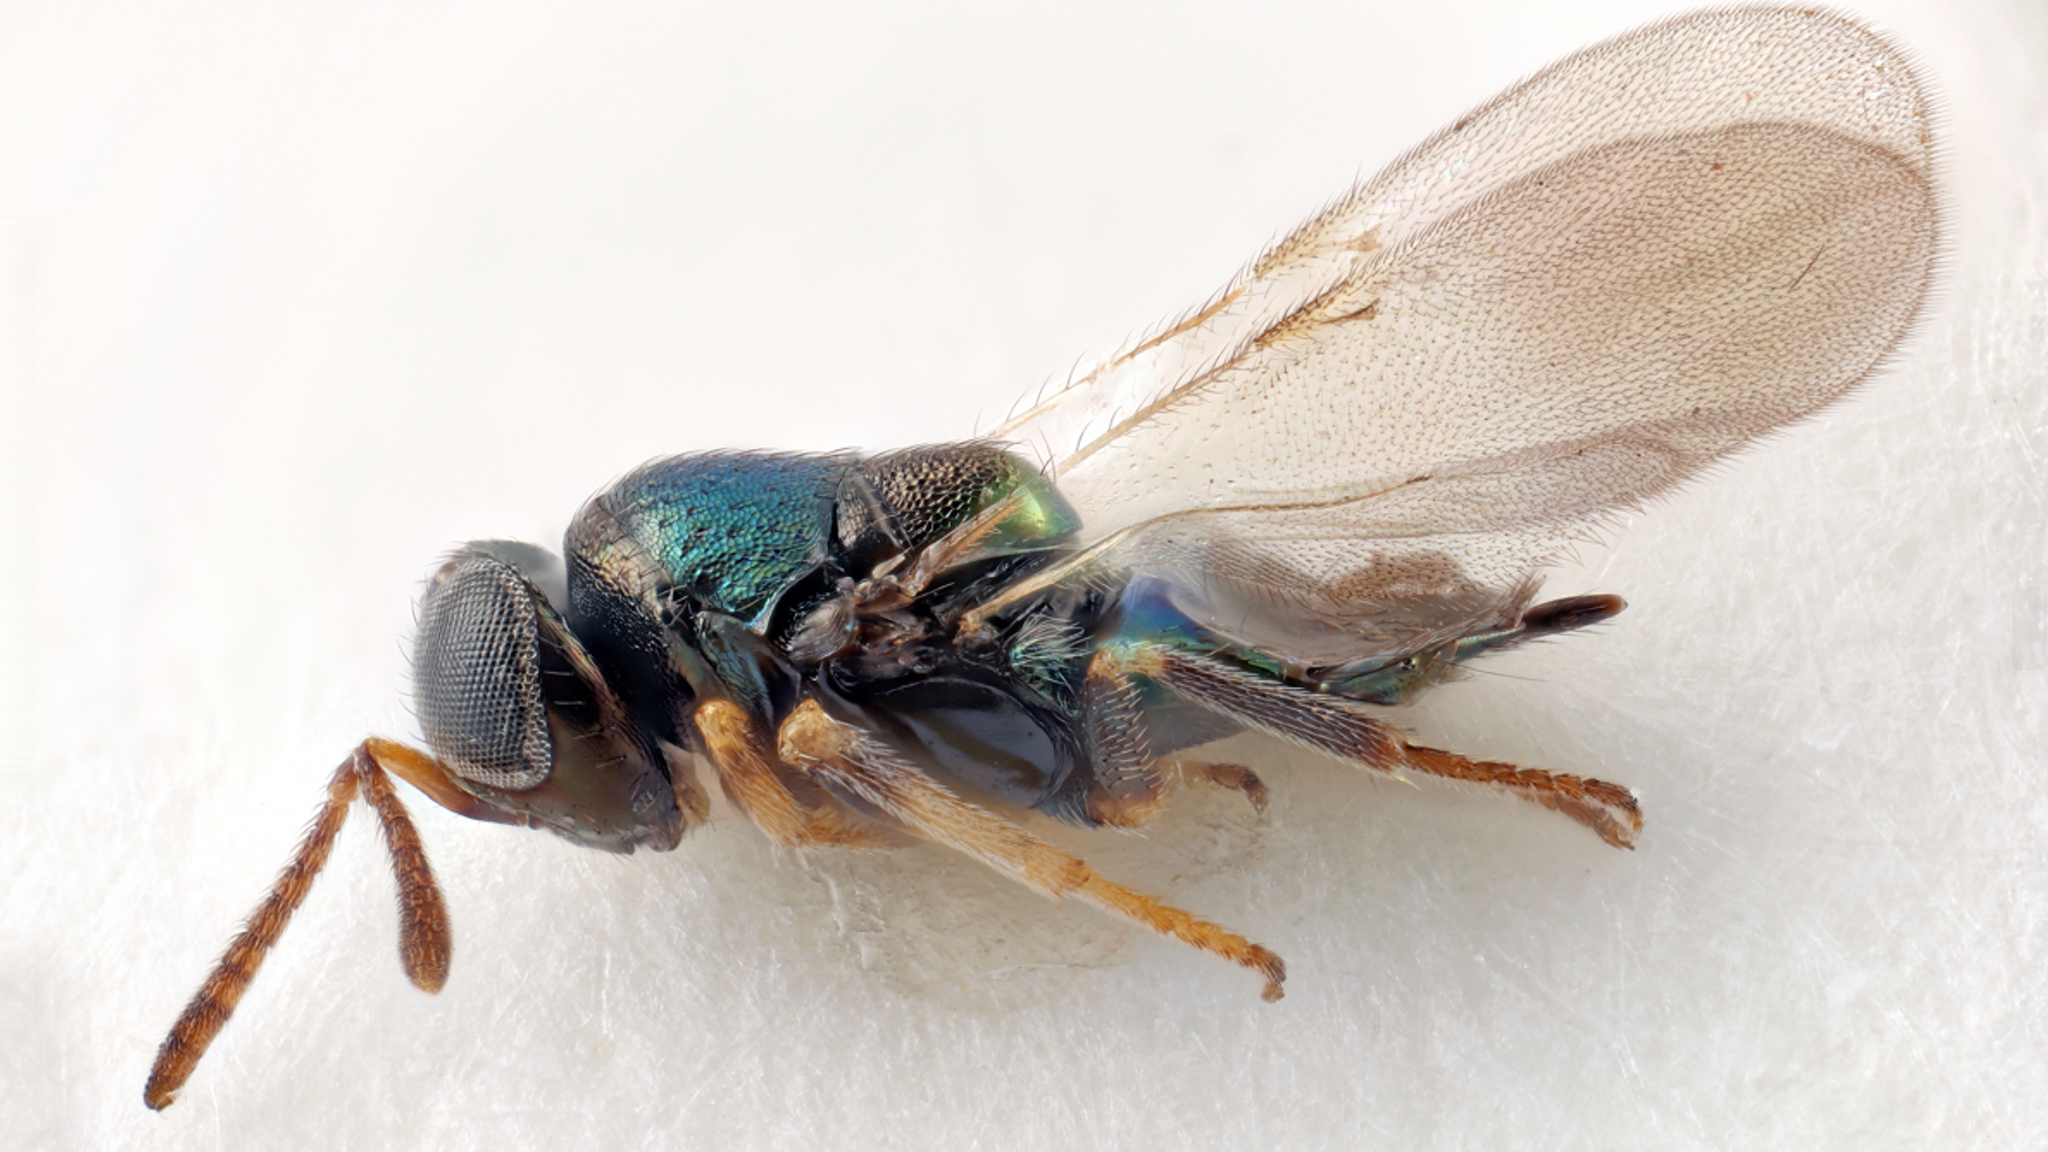 Doctor Who aliens give their name to newly discovered wasps